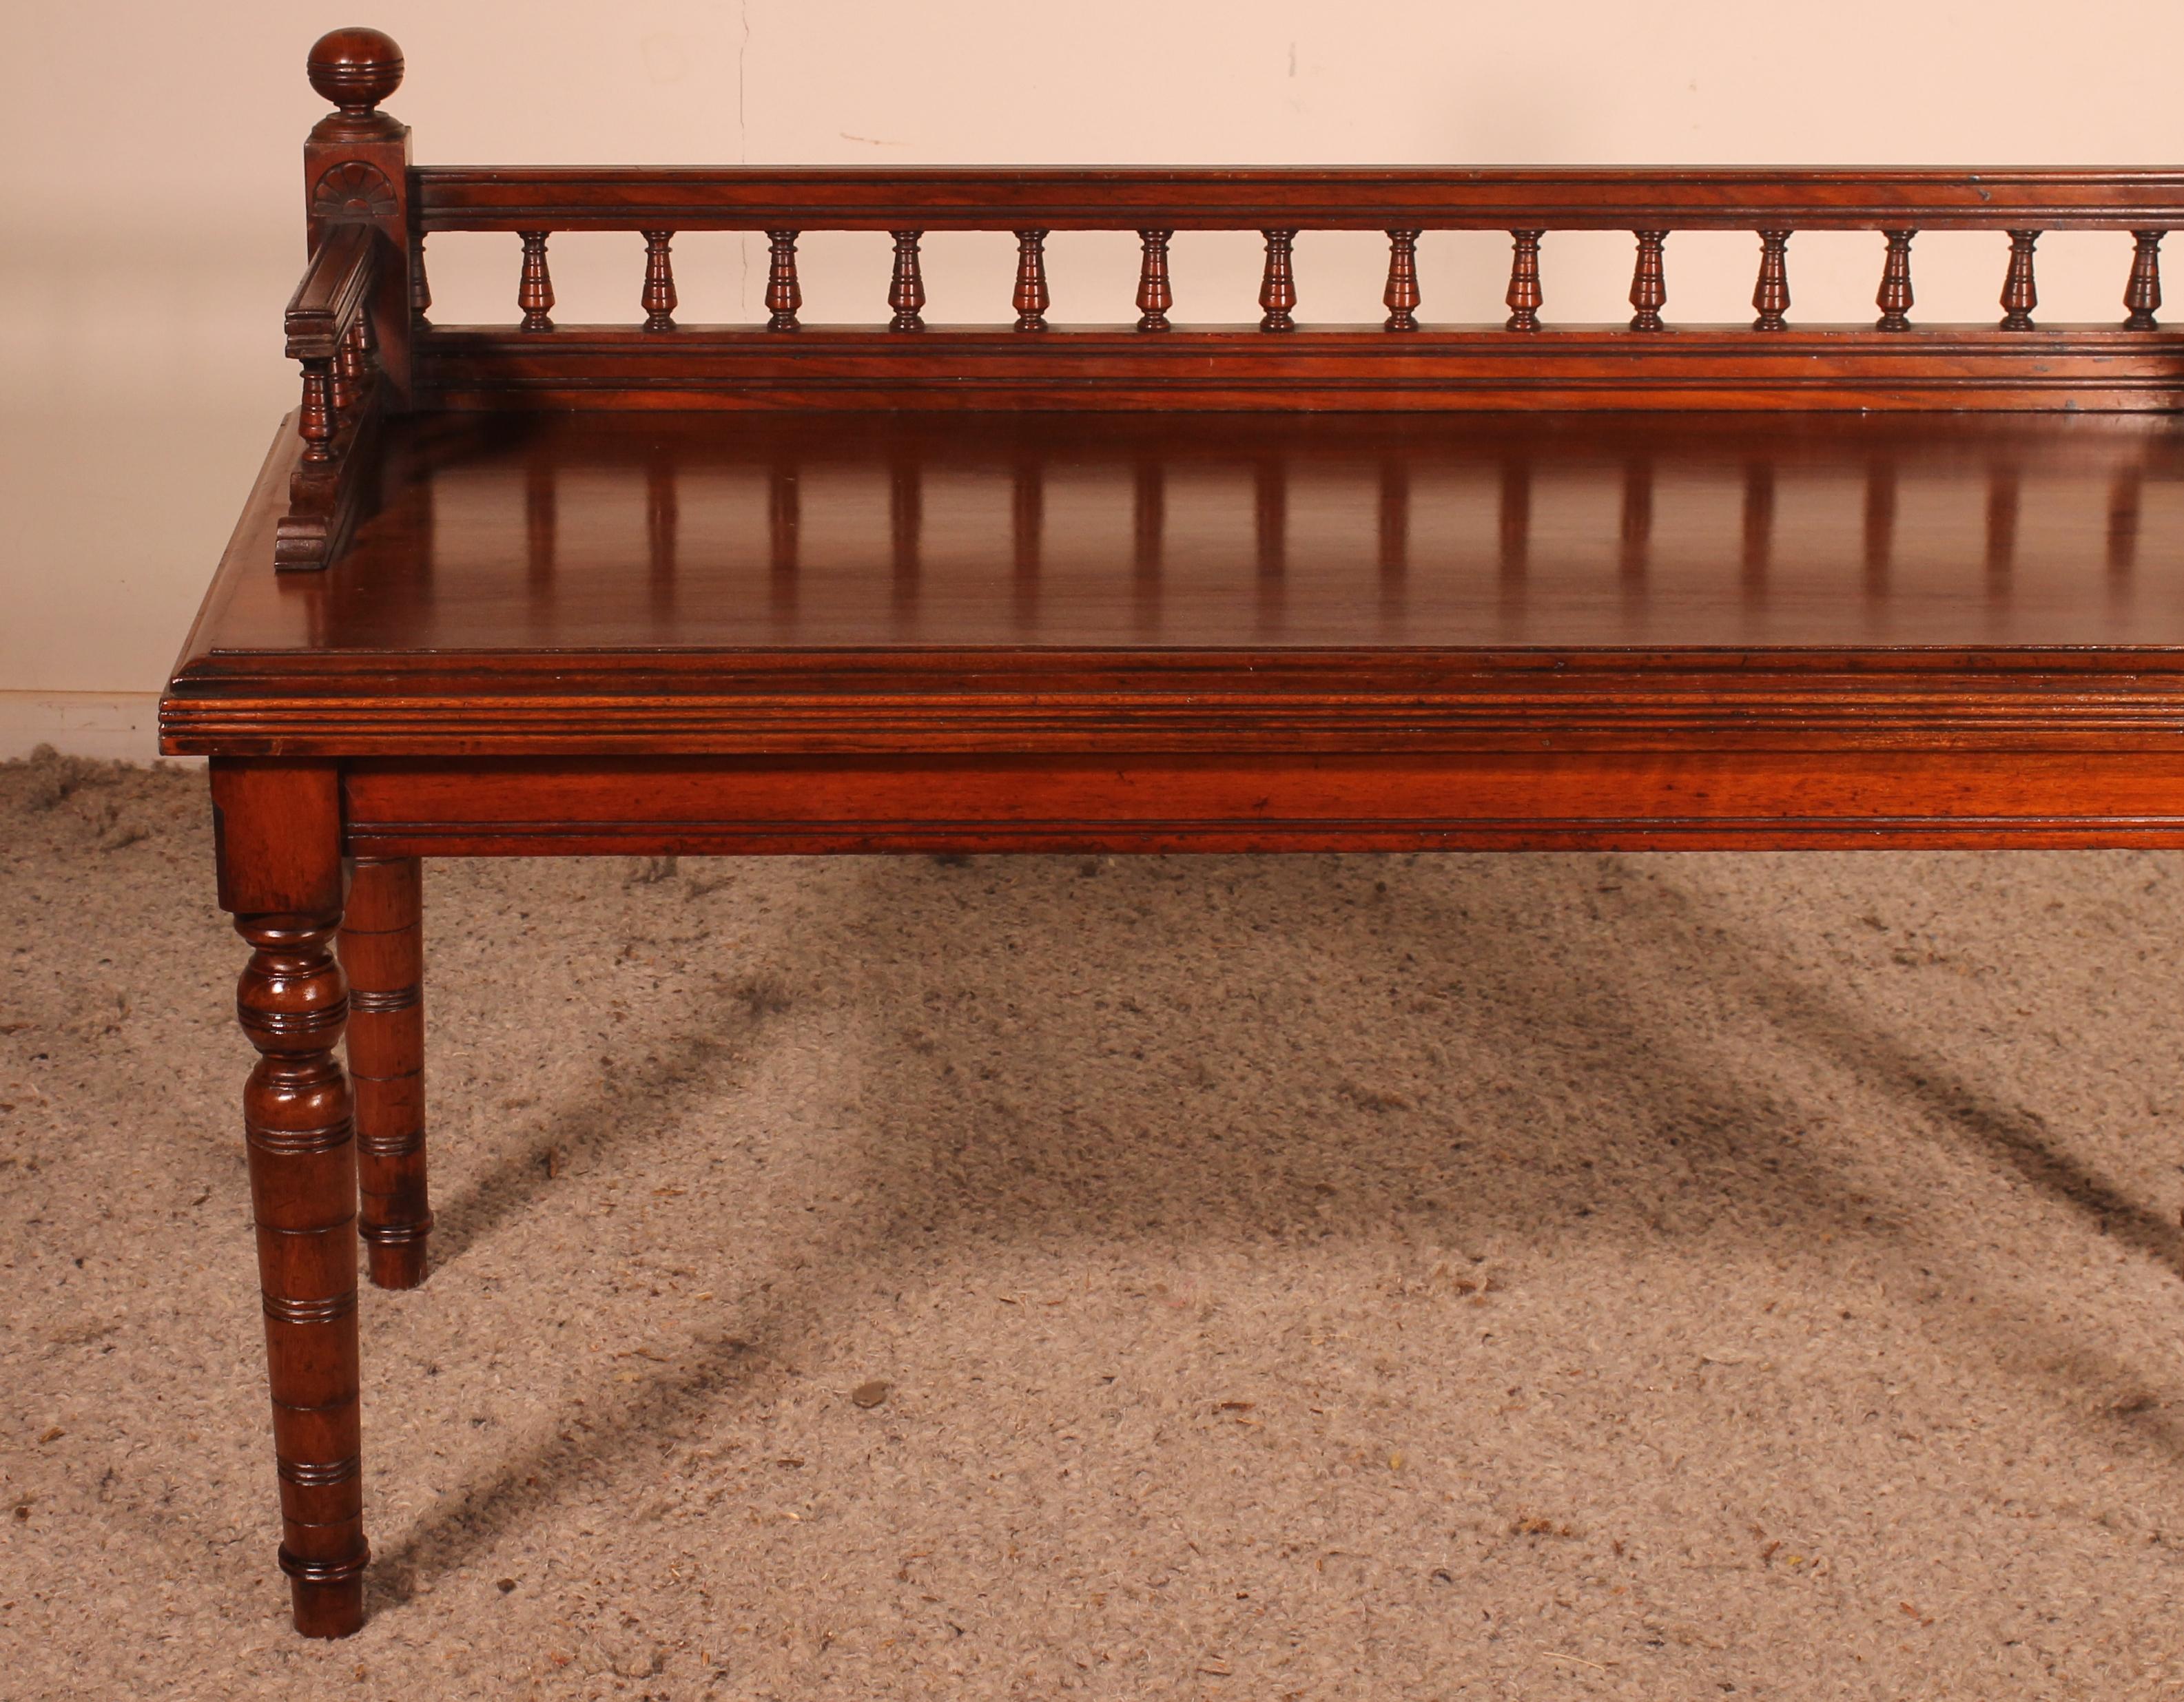 A fine 19th century mahogany bench from England
Very beautiful solid mahogany base with a very beautiful turning and a beautiful decoration on the top
Solid mahogany table top with a very beautiful patina
Superb patina and in perfect condition.